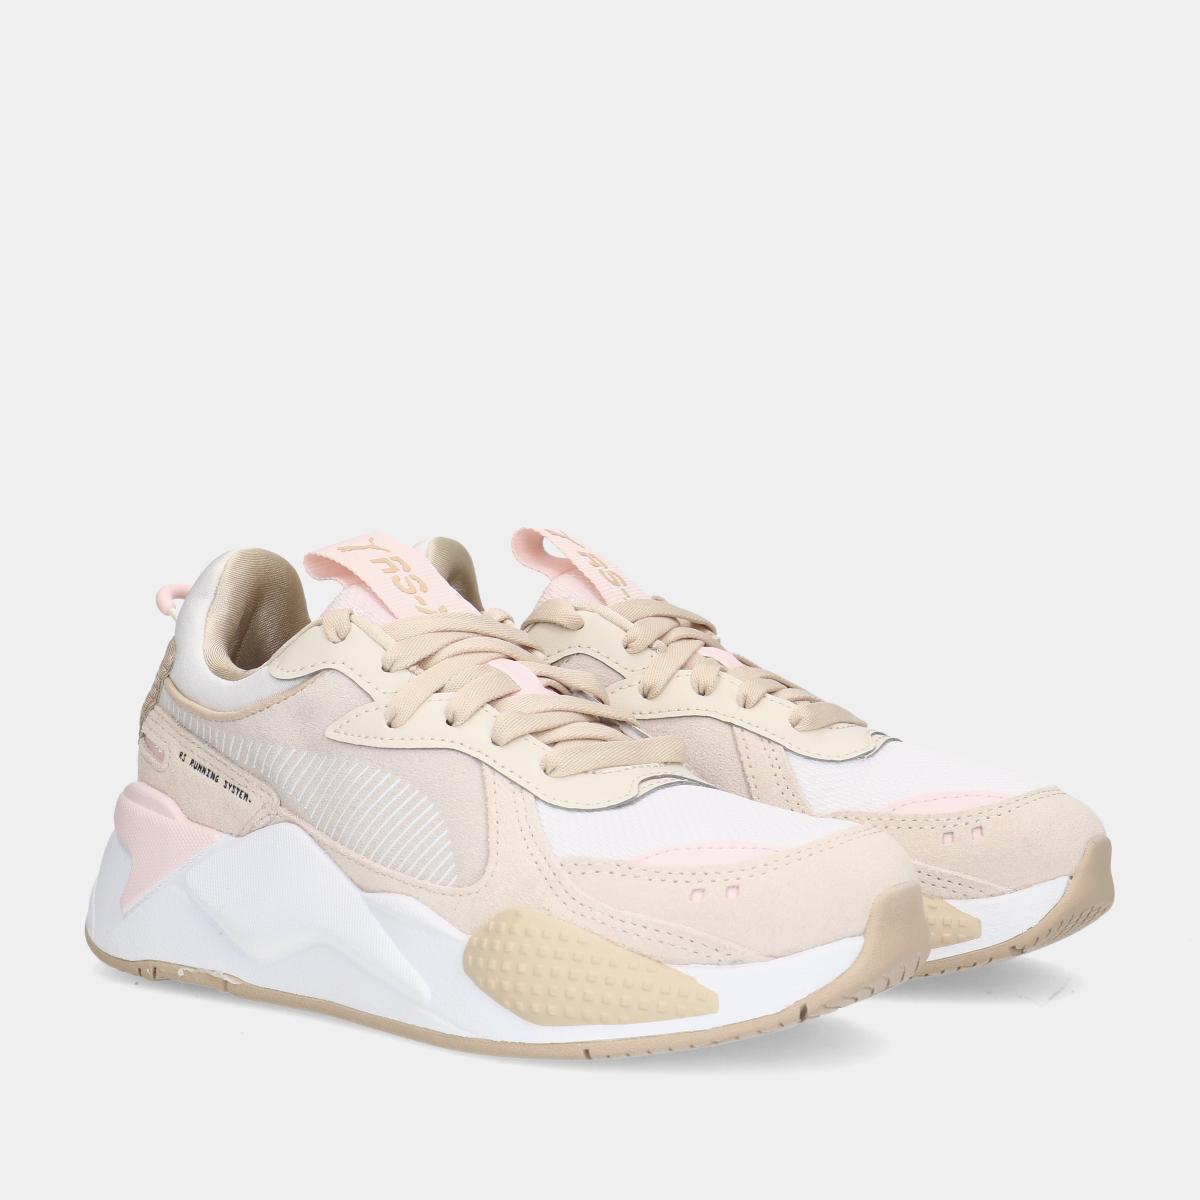 Puma RS-X Reinvent Frosty Pink/ Puma White dames sneakers